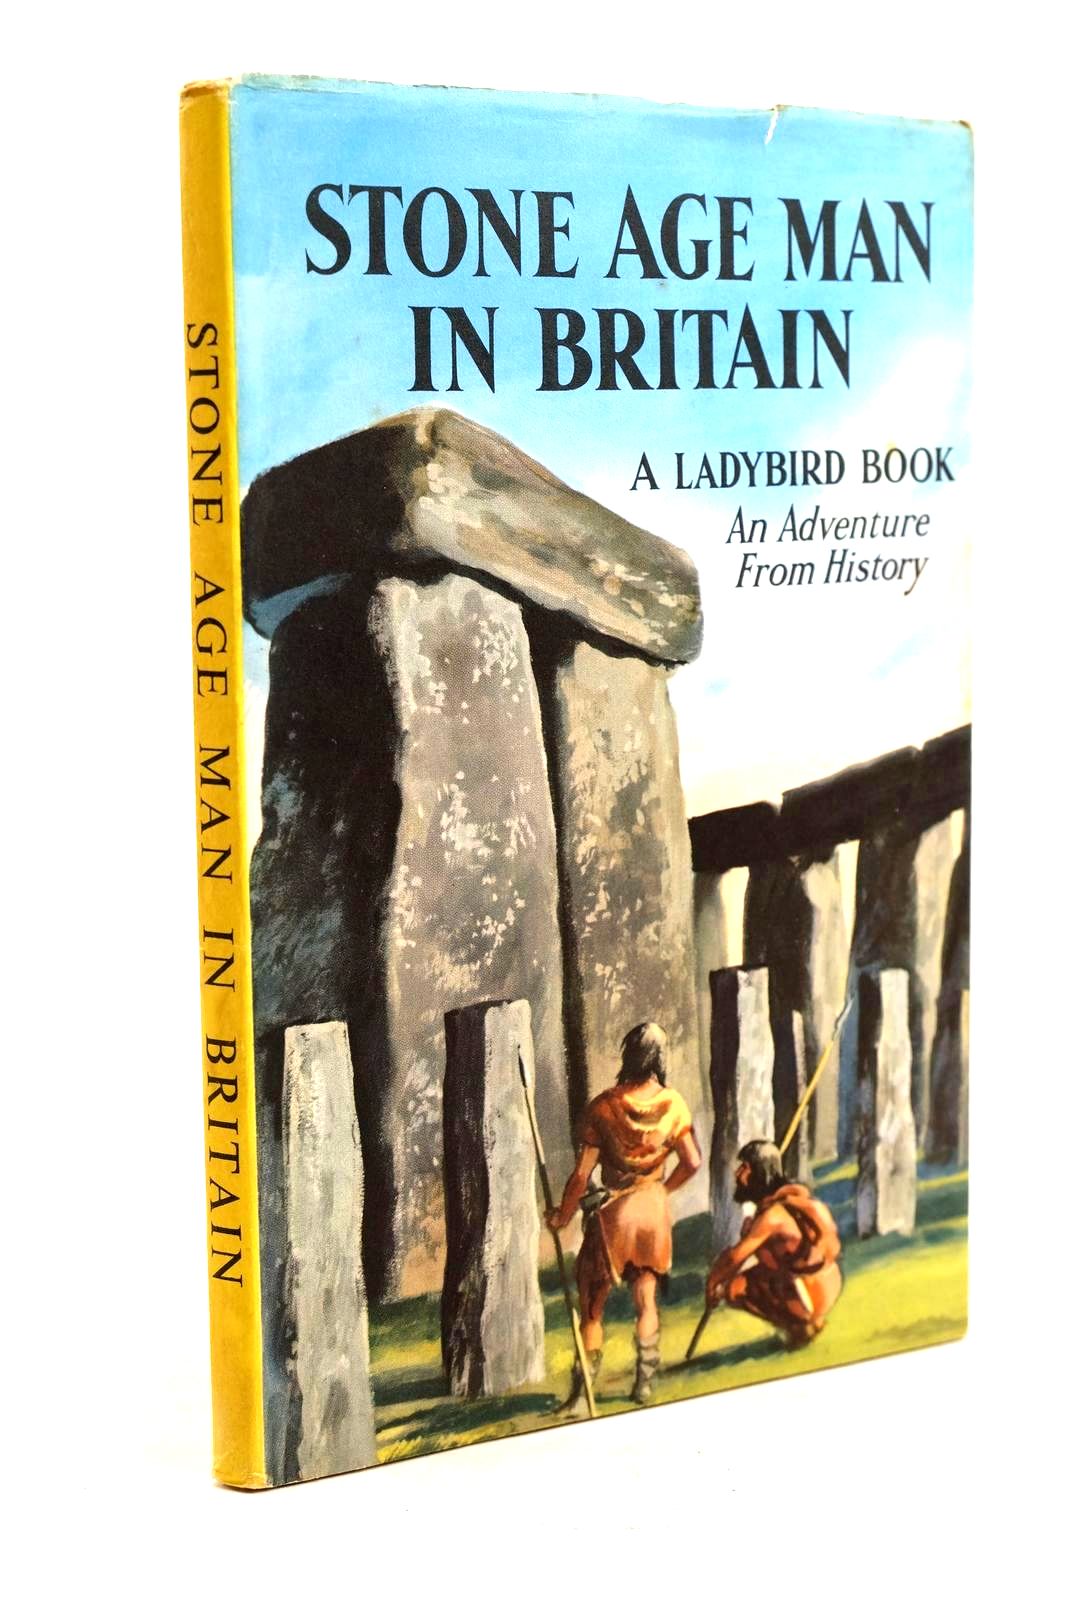 Photo of STONE AGE MAN IN BRITAIN written by Peach, L. Du Garde illustrated by Kenney, John published by Wills &amp; Hepworth Ltd. (STOCK CODE: 1320630)  for sale by Stella & Rose's Books